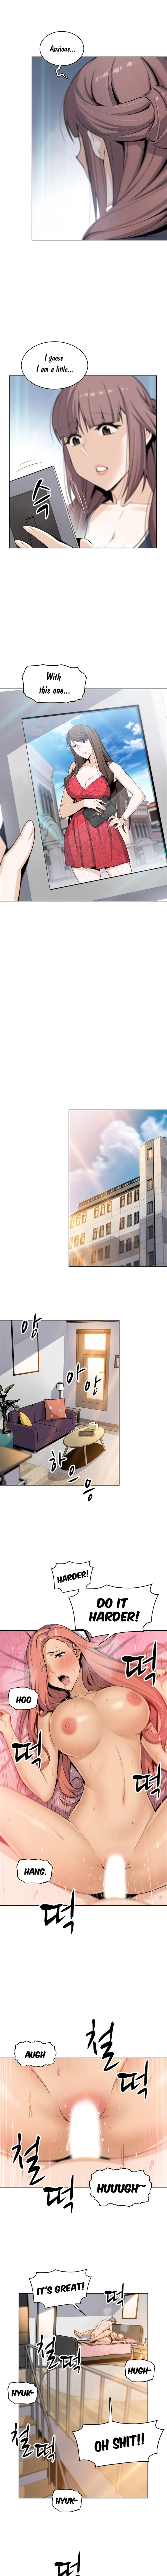 Housekeeper Manhwa - Chapter 36 Page 4